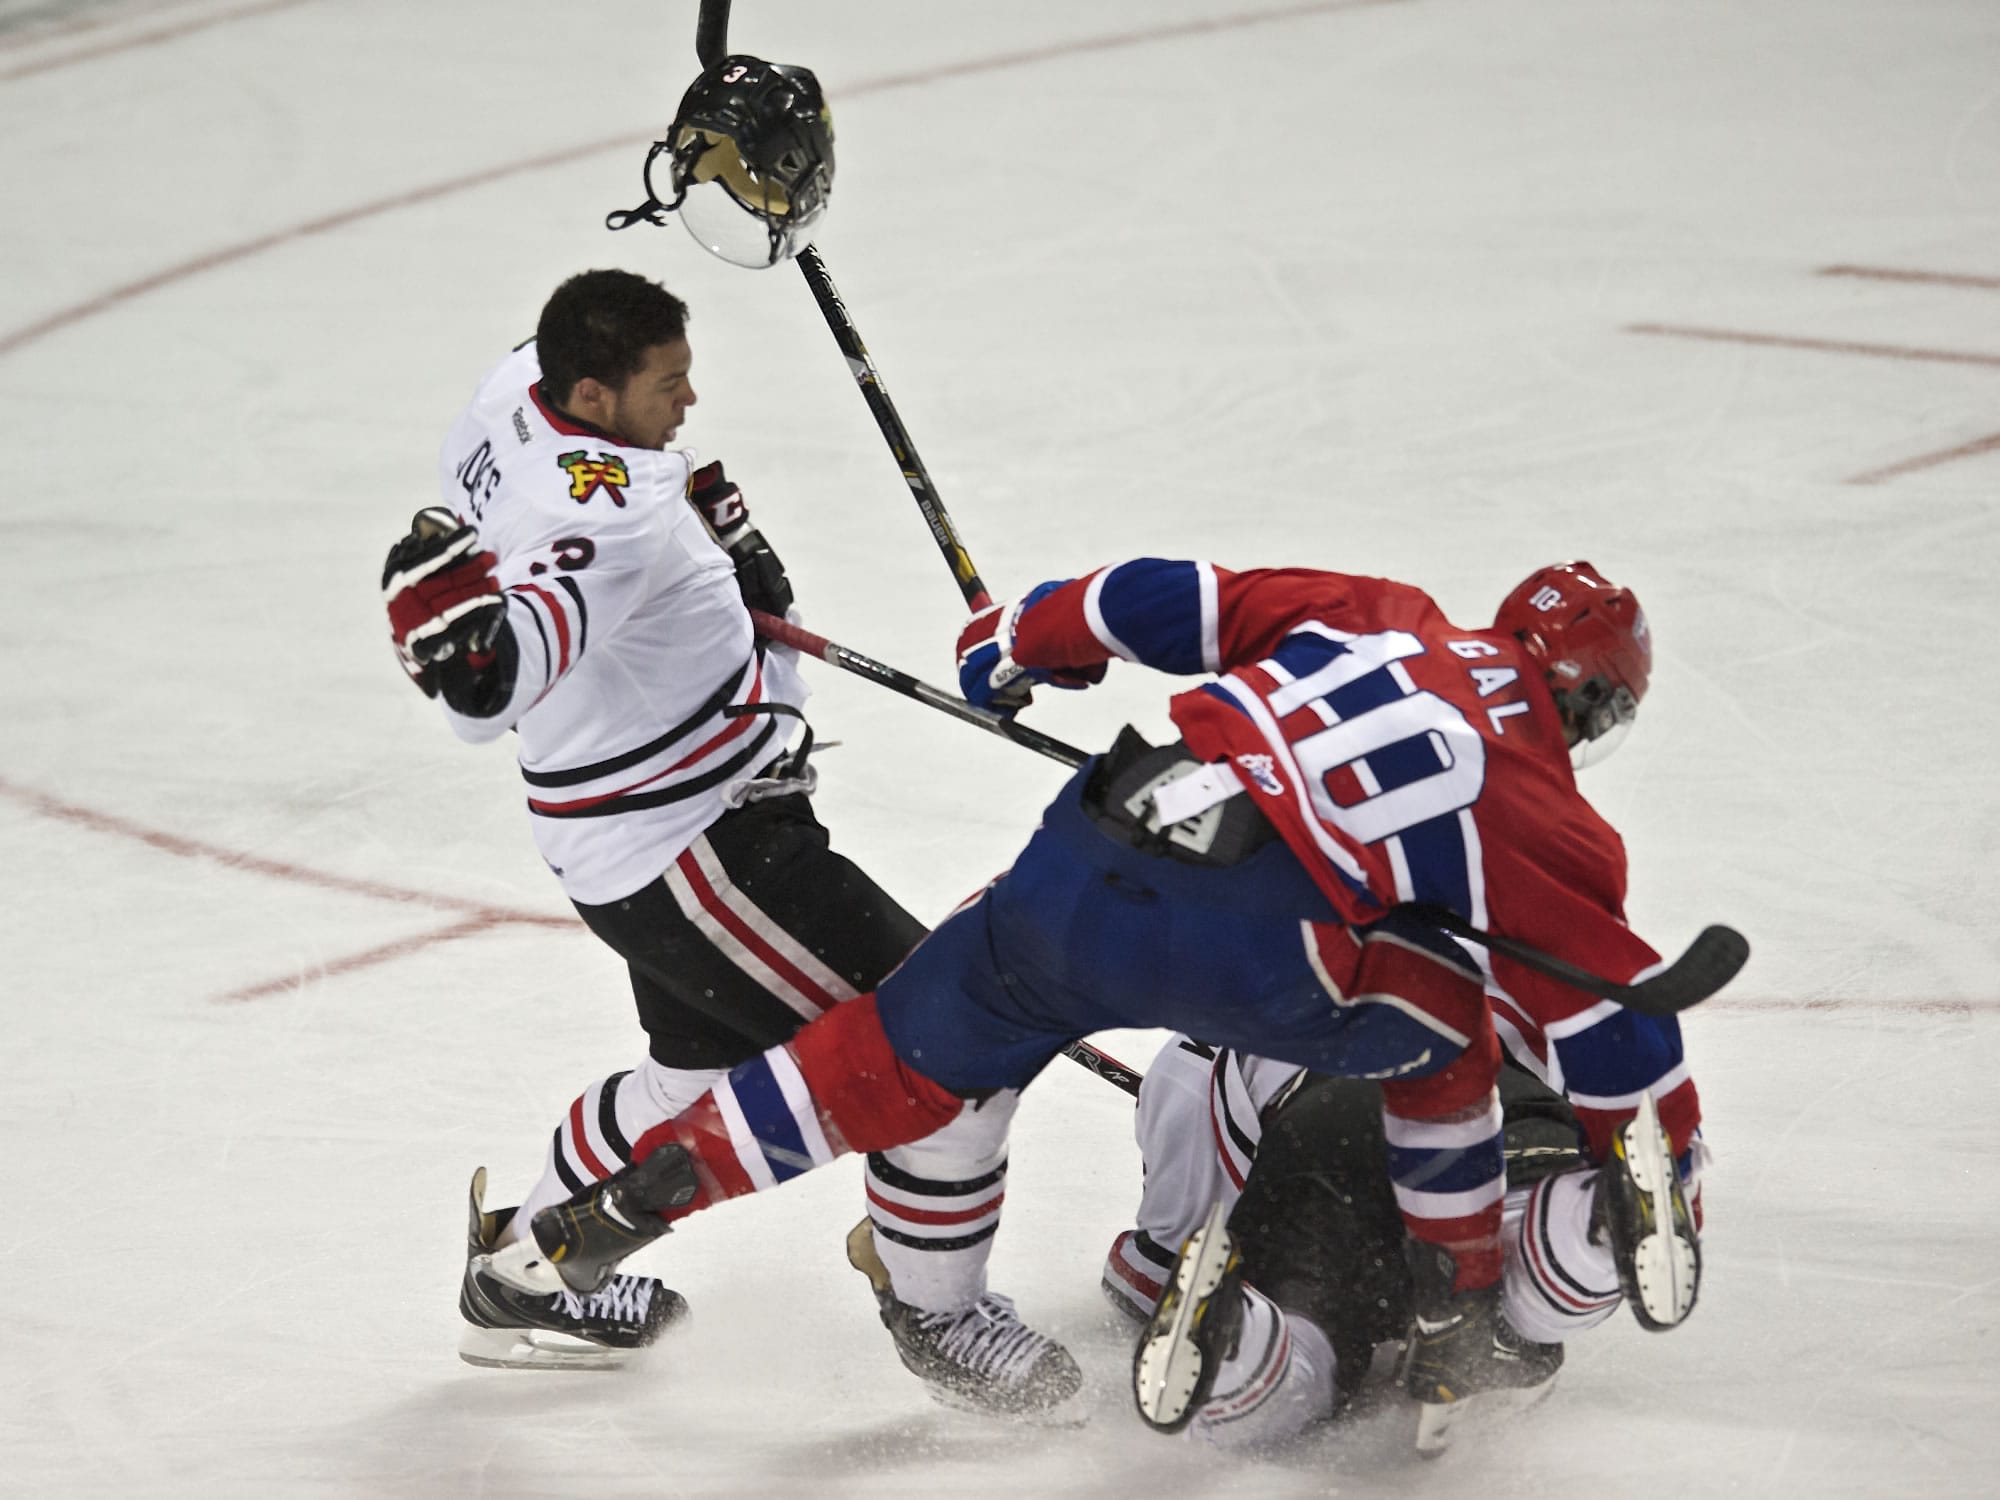 The Portland Winterhawks' Seth Jones has his helmet goes flying after colliding with the Spokane Chiefs' Blake Gal in the third period of game two of a second round playoff matchup on Saturday.